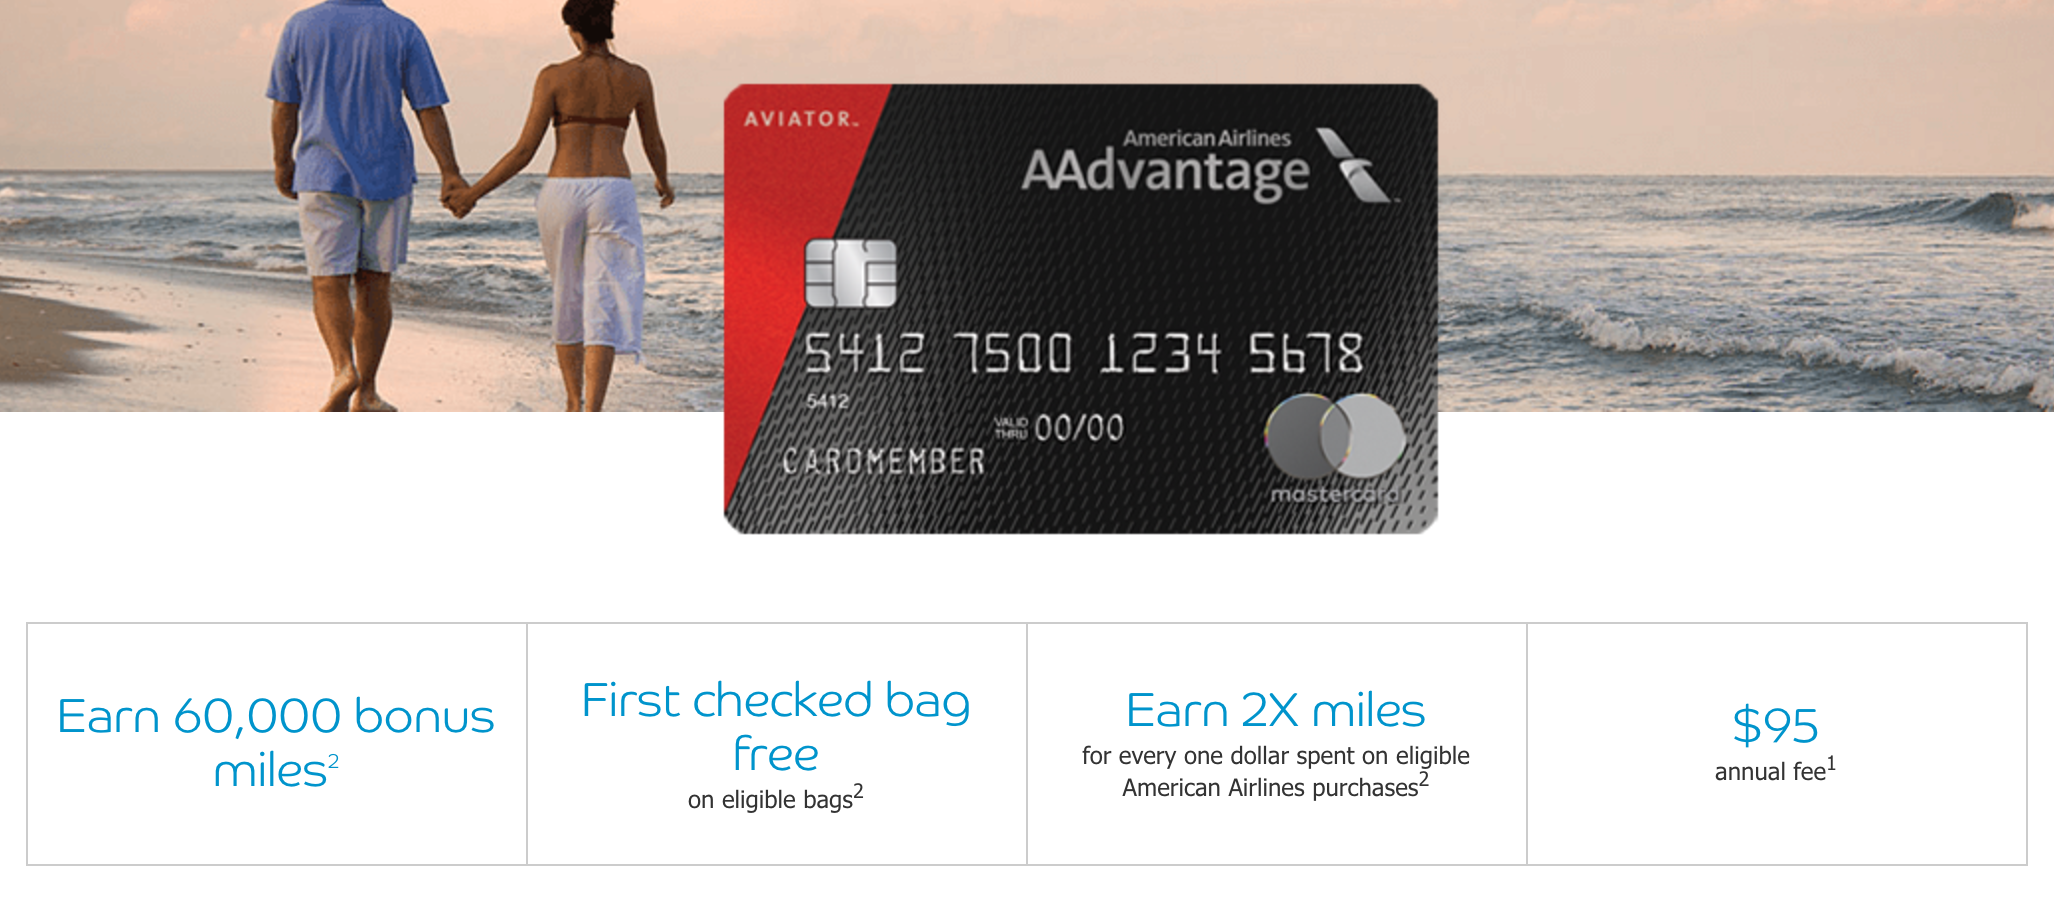 American Airlines Credit Card Now at 60K! - UponArriving